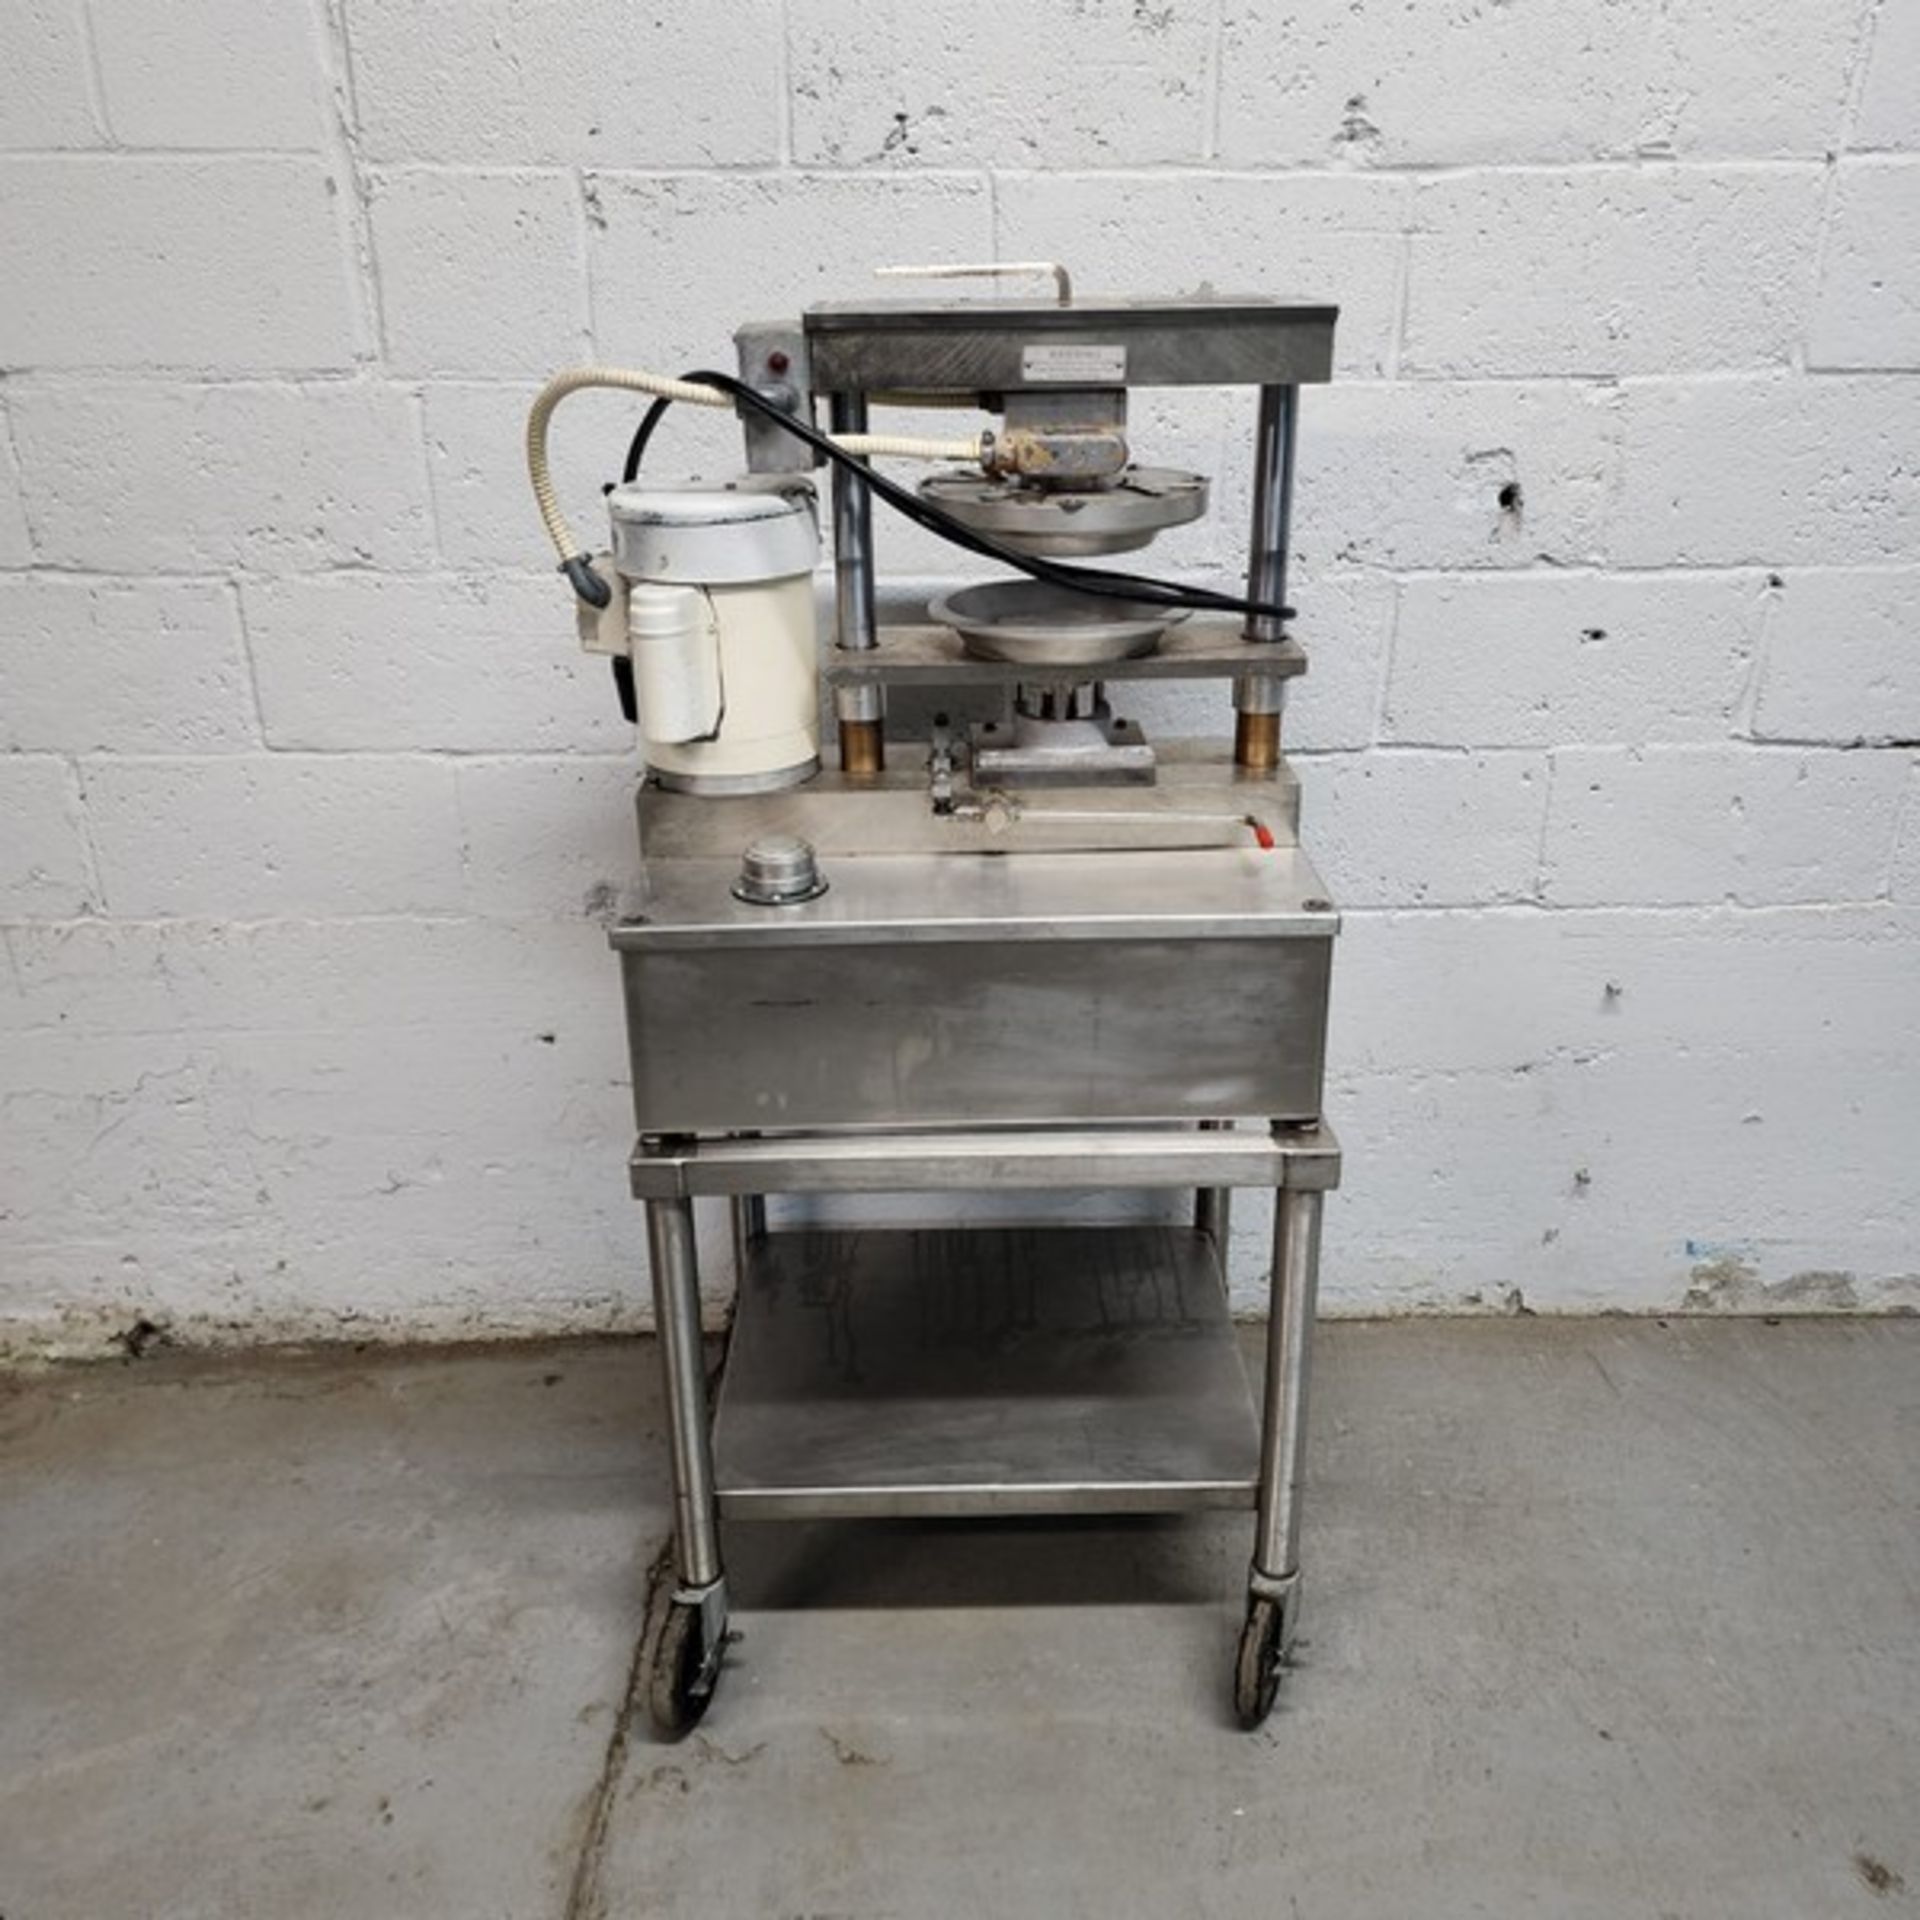 Comtec pie press model 1100 120 volts in good working condition (Item #103T) (Simple loading Fee $